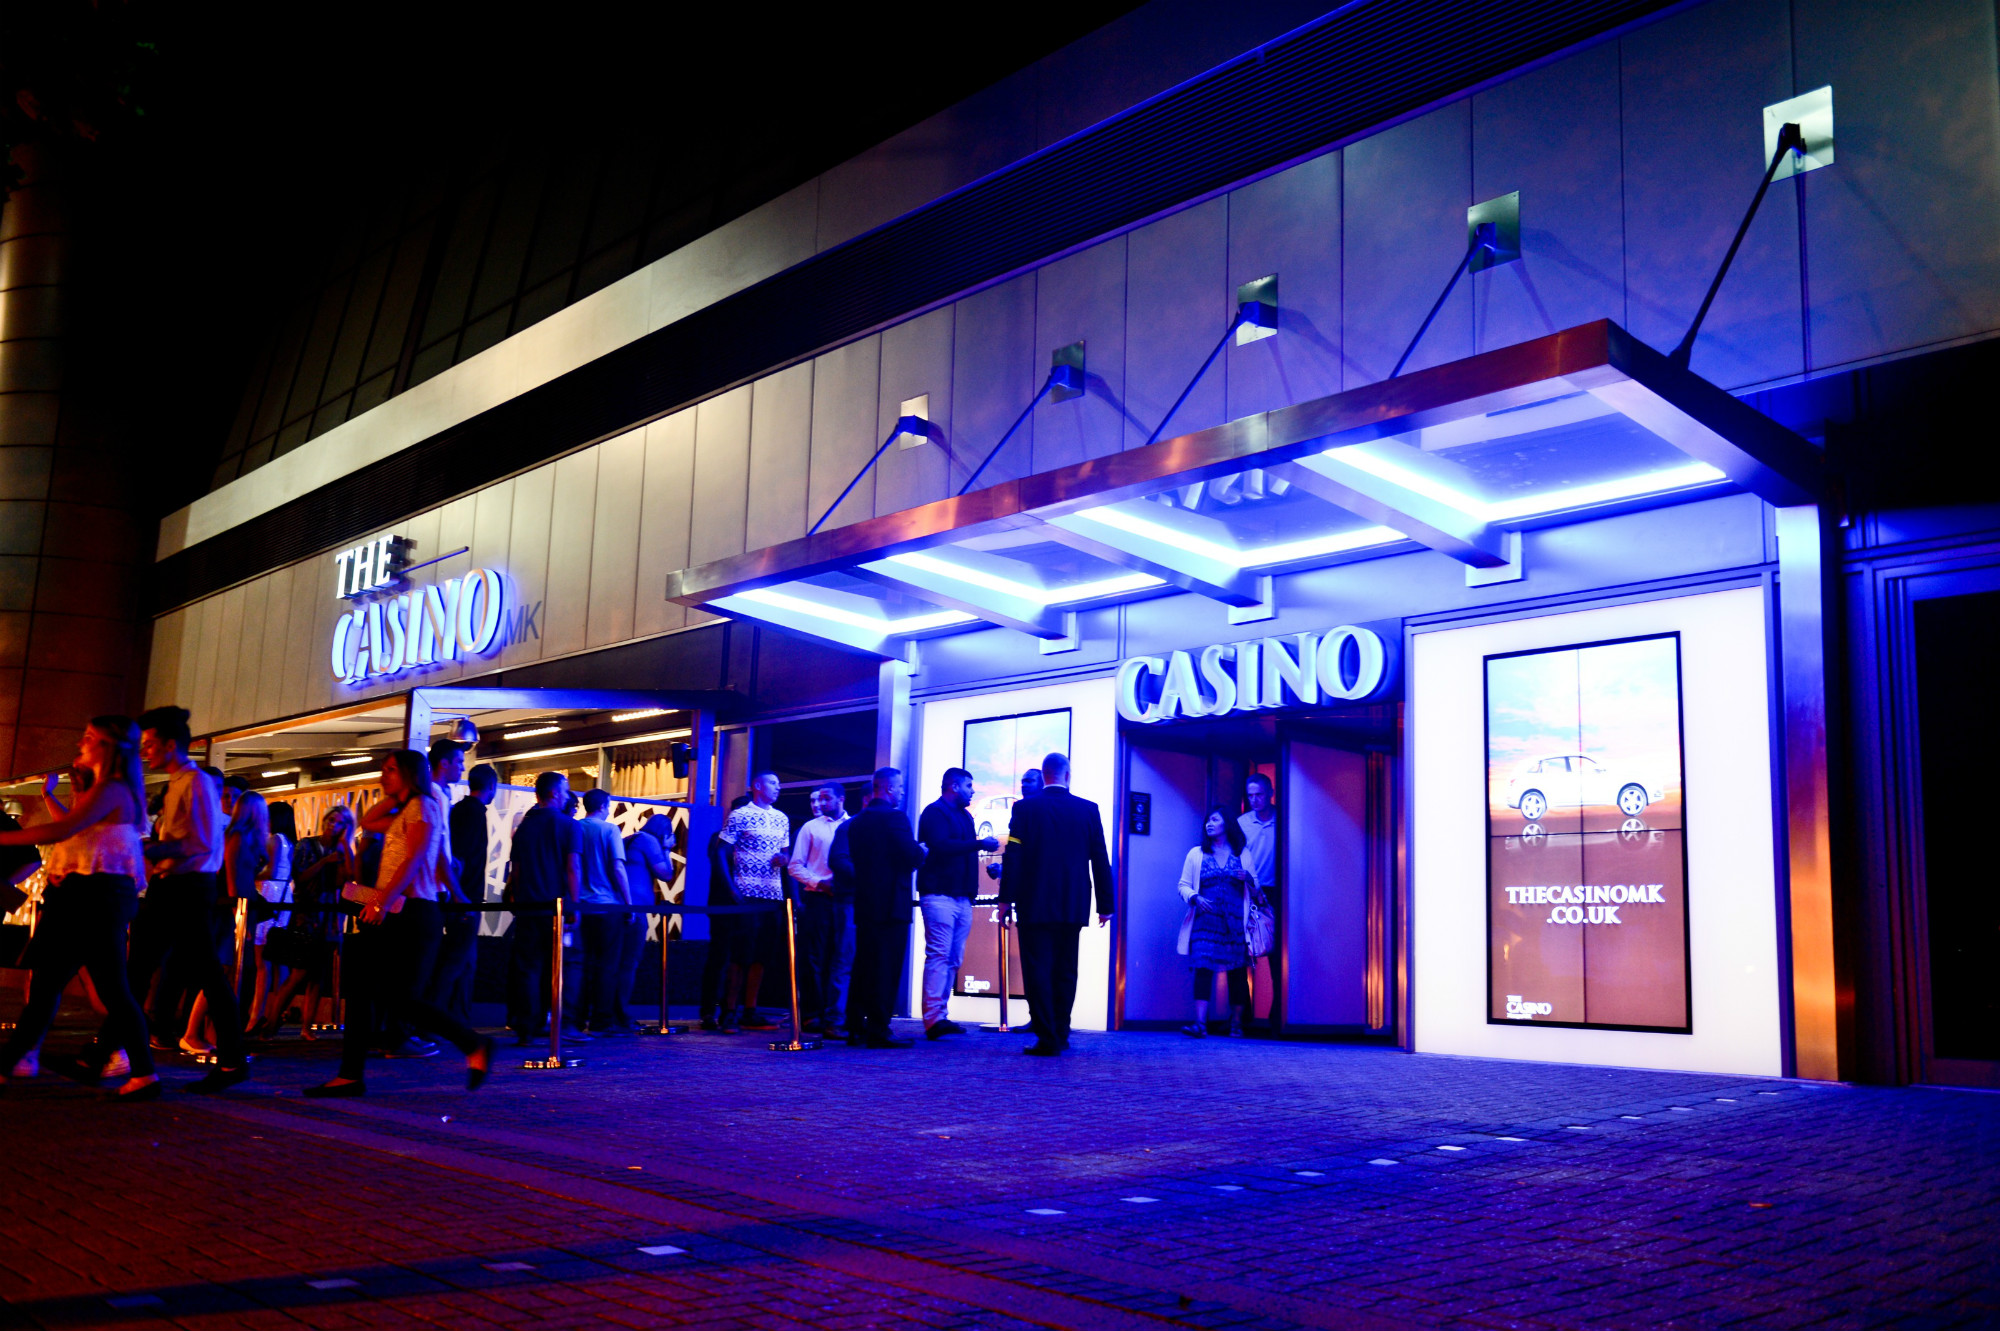 Behind The Scenes with the 'Poker Pro' at Casino Milton Keynes